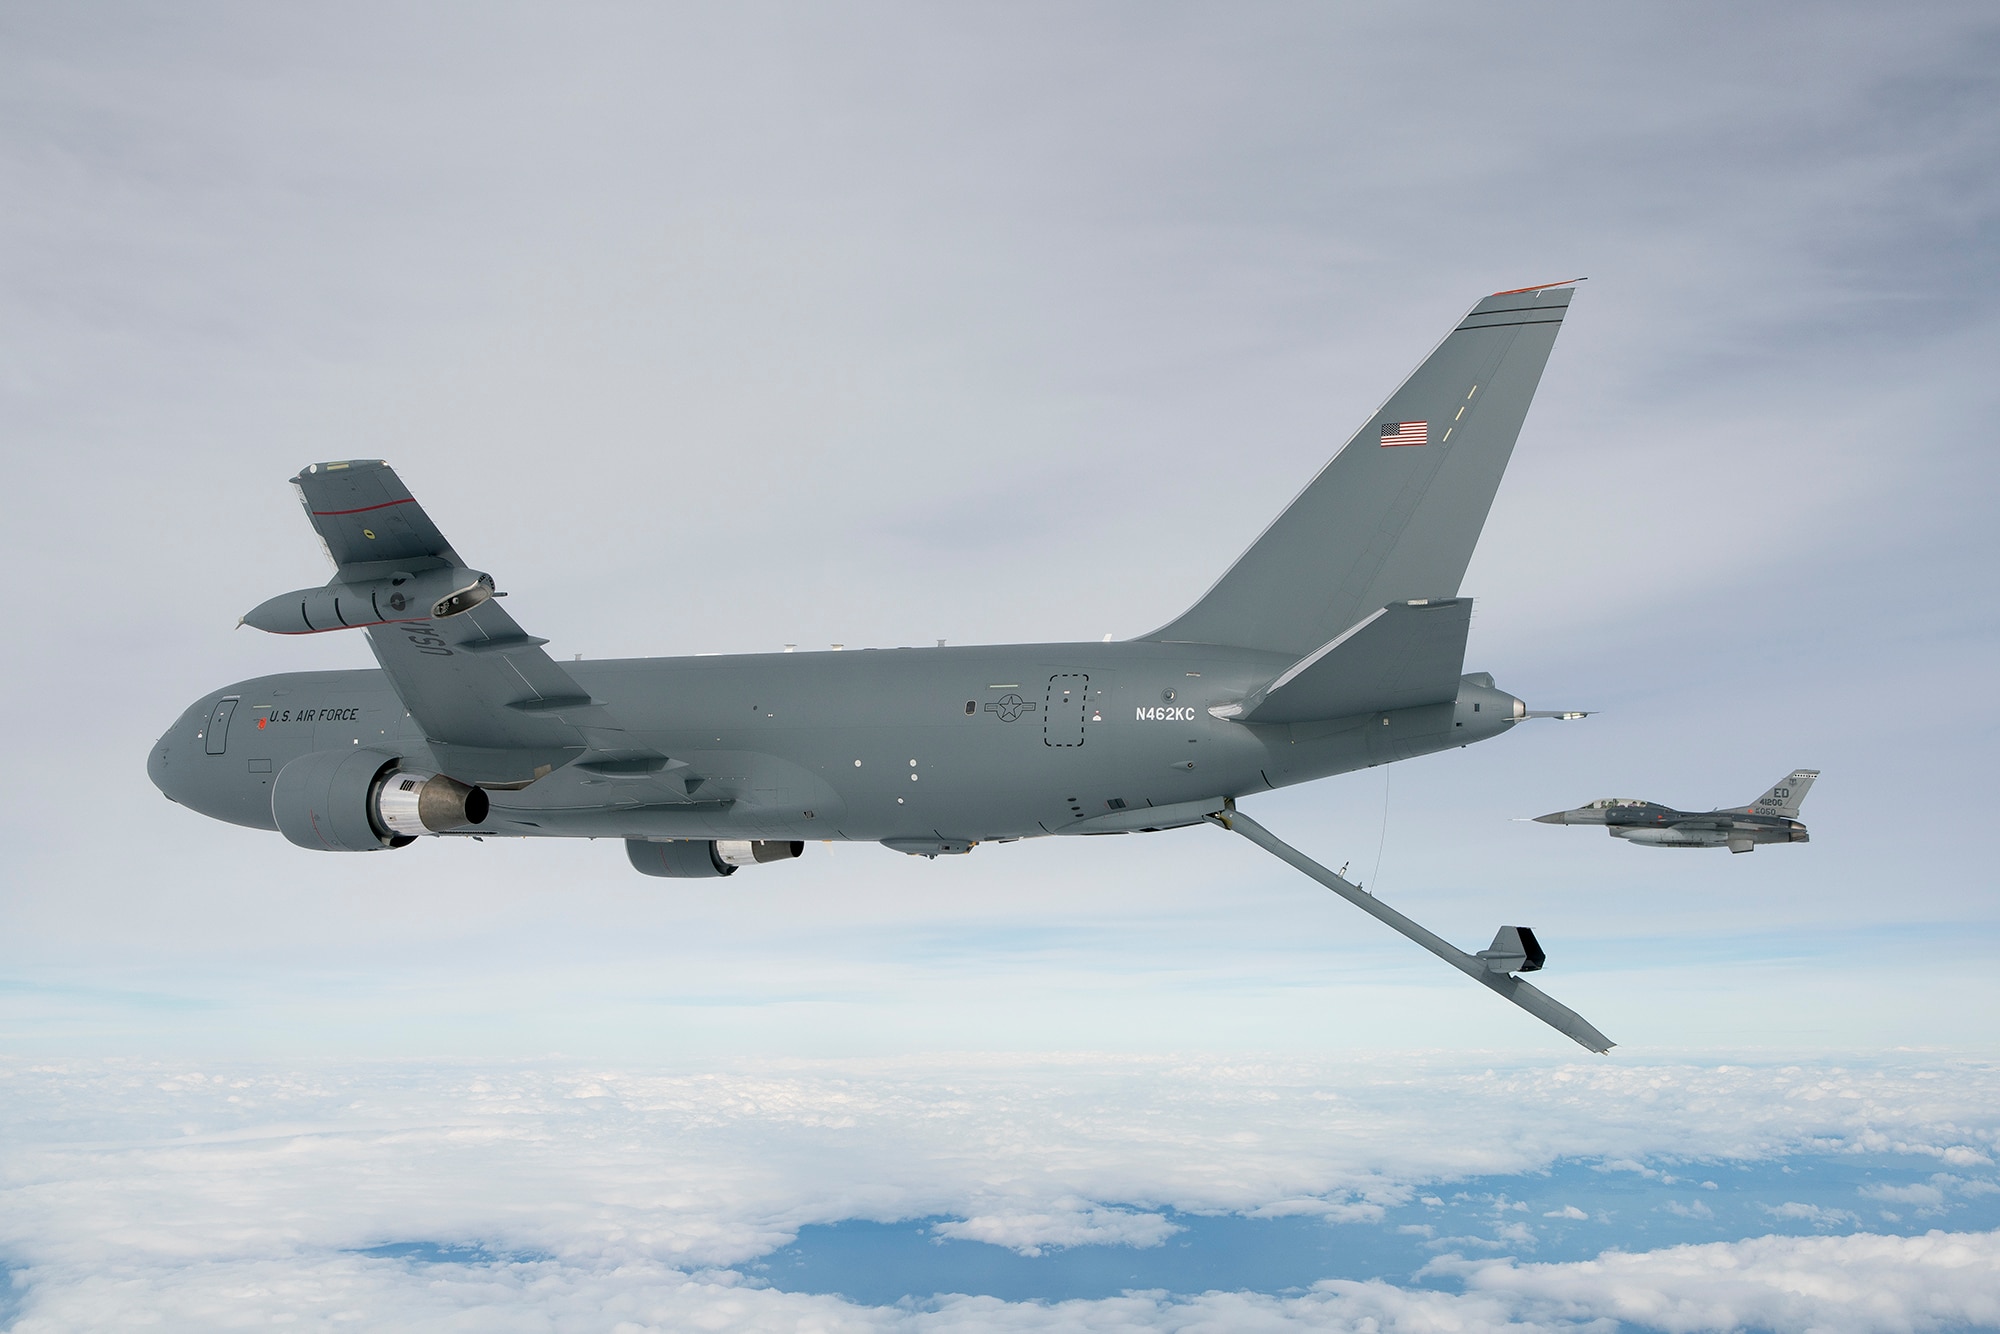 The KC-46A Pegasus deploys the centerline boom for the first time Oct. 9, 2015. The boom is the fastest way to refuel aircraft at 1,200 gallons per minute. (Boeing photo/John D. Parker)